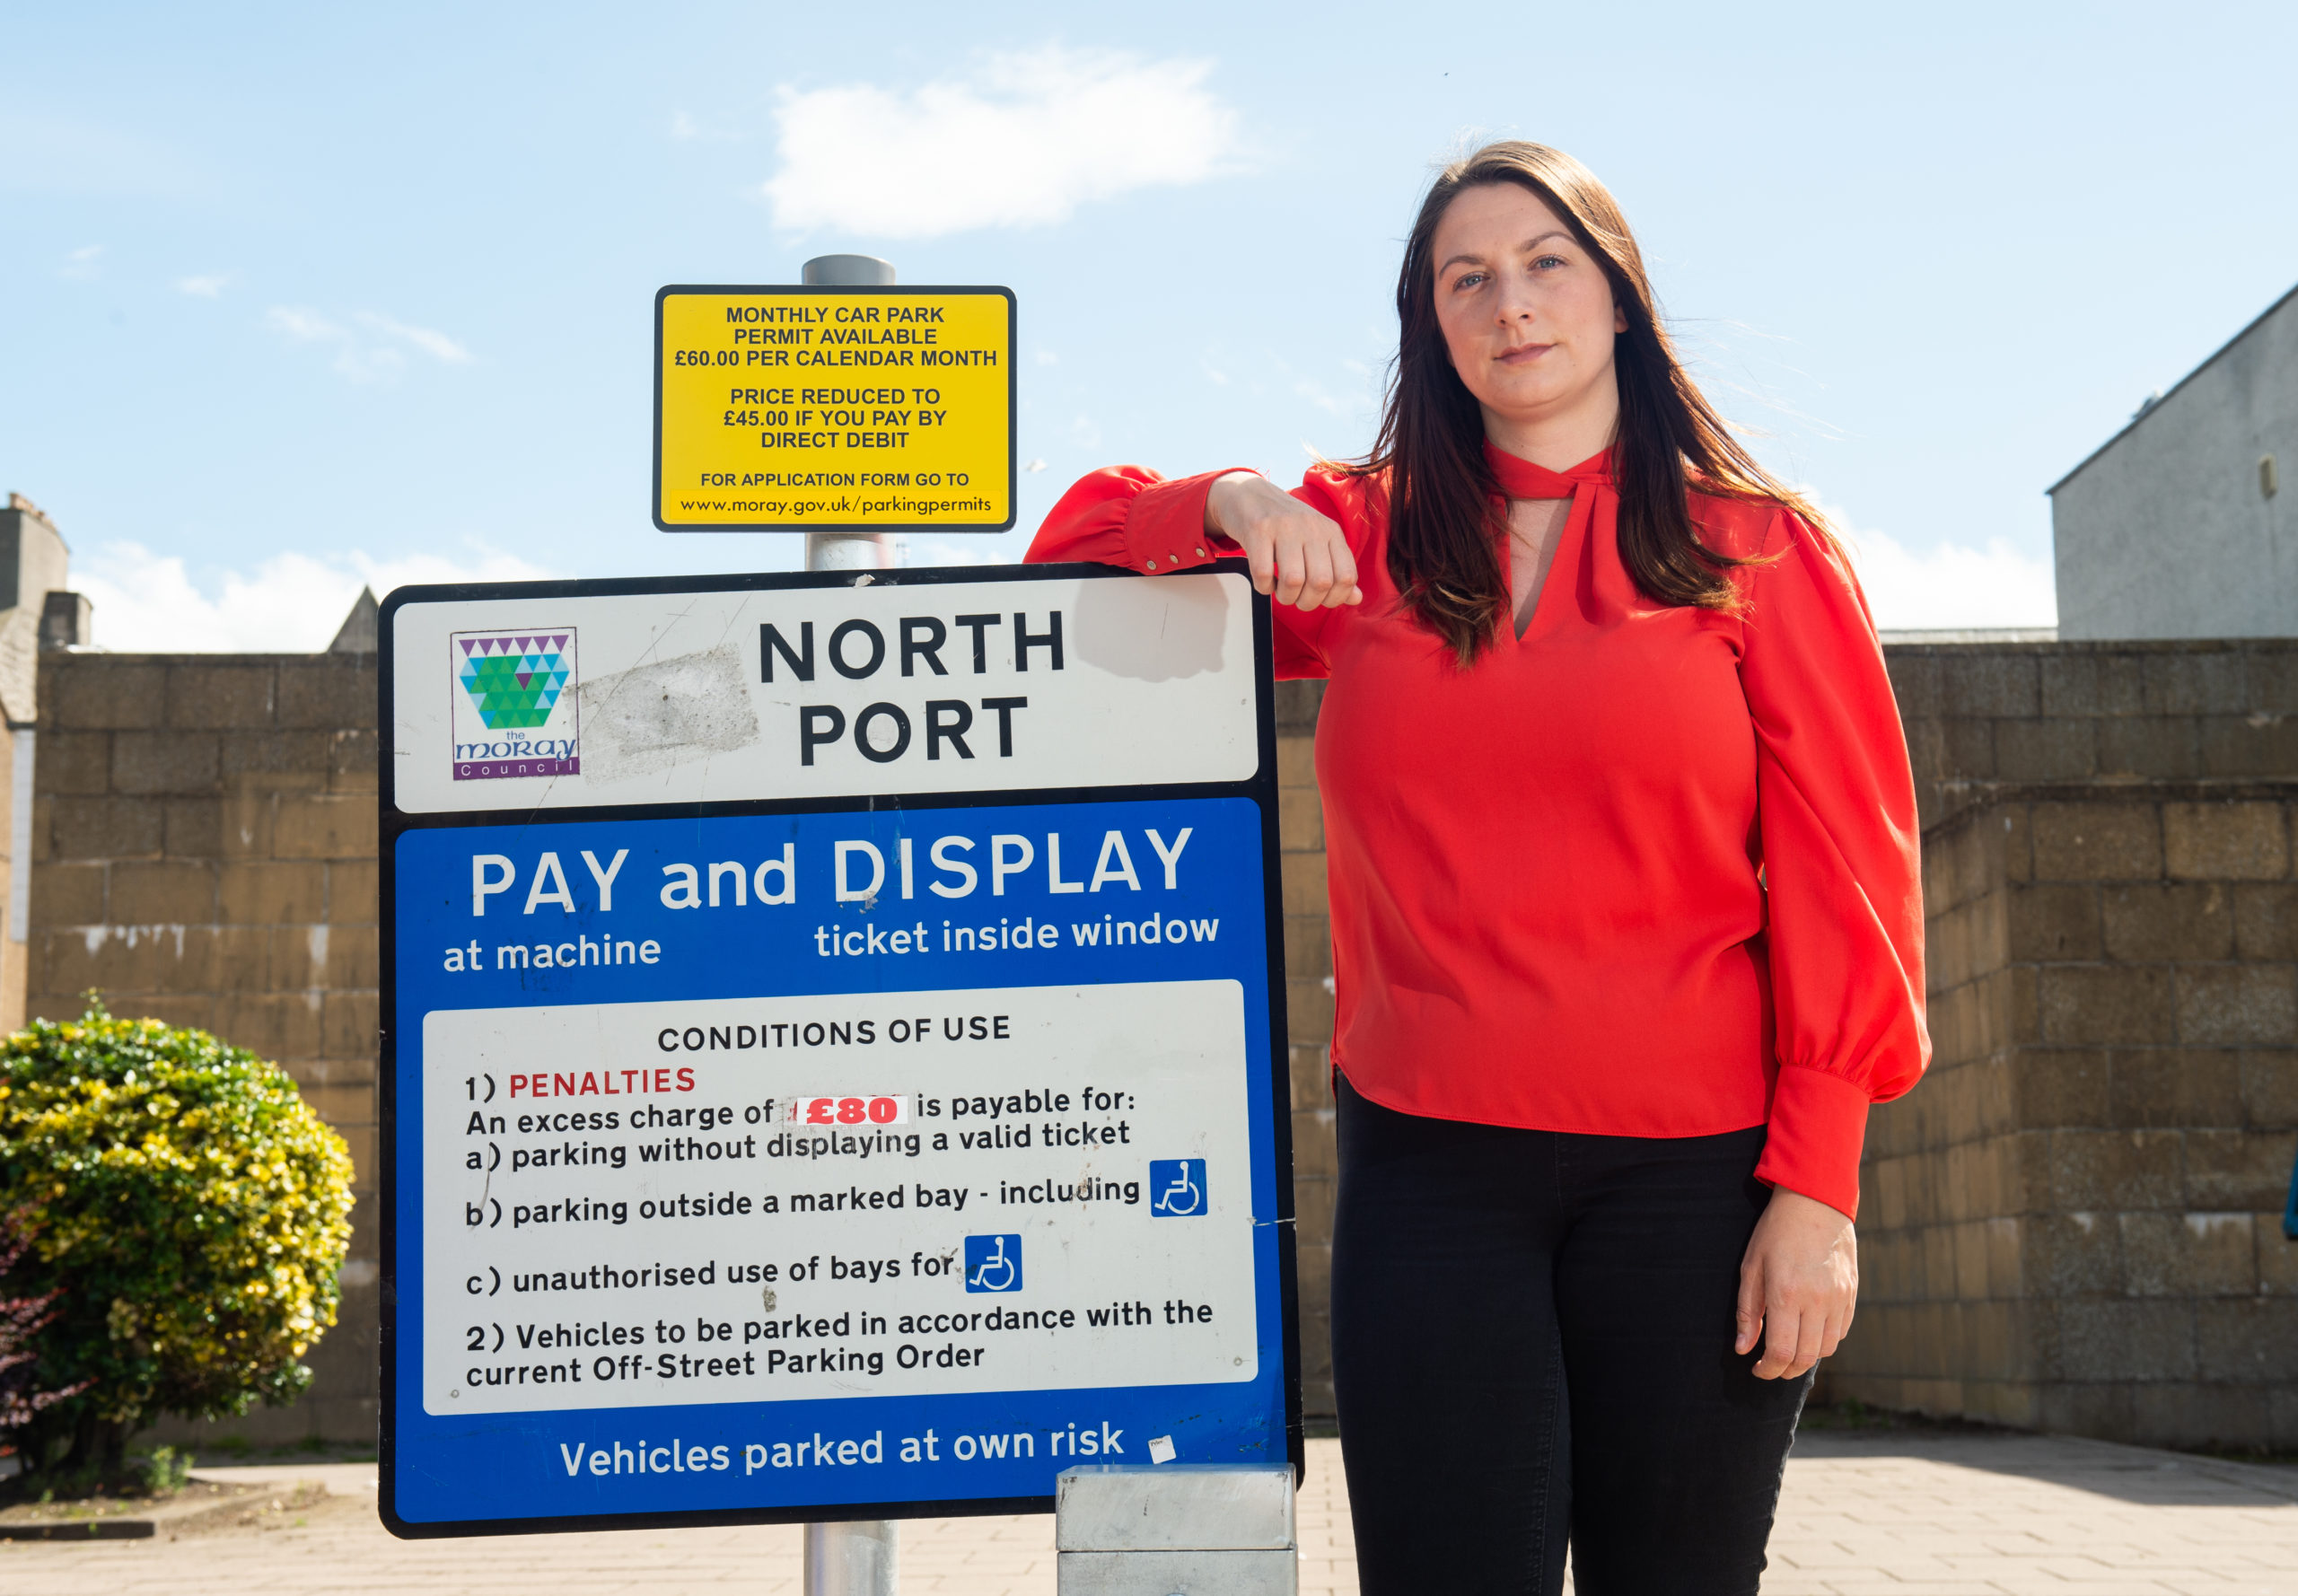 Moray Chamber of Commerce chief executive Sarah Medcraf co-signed a letter urging the council to reconsider their position on reinstating car parking charges.
Picture by Jason Hedges.